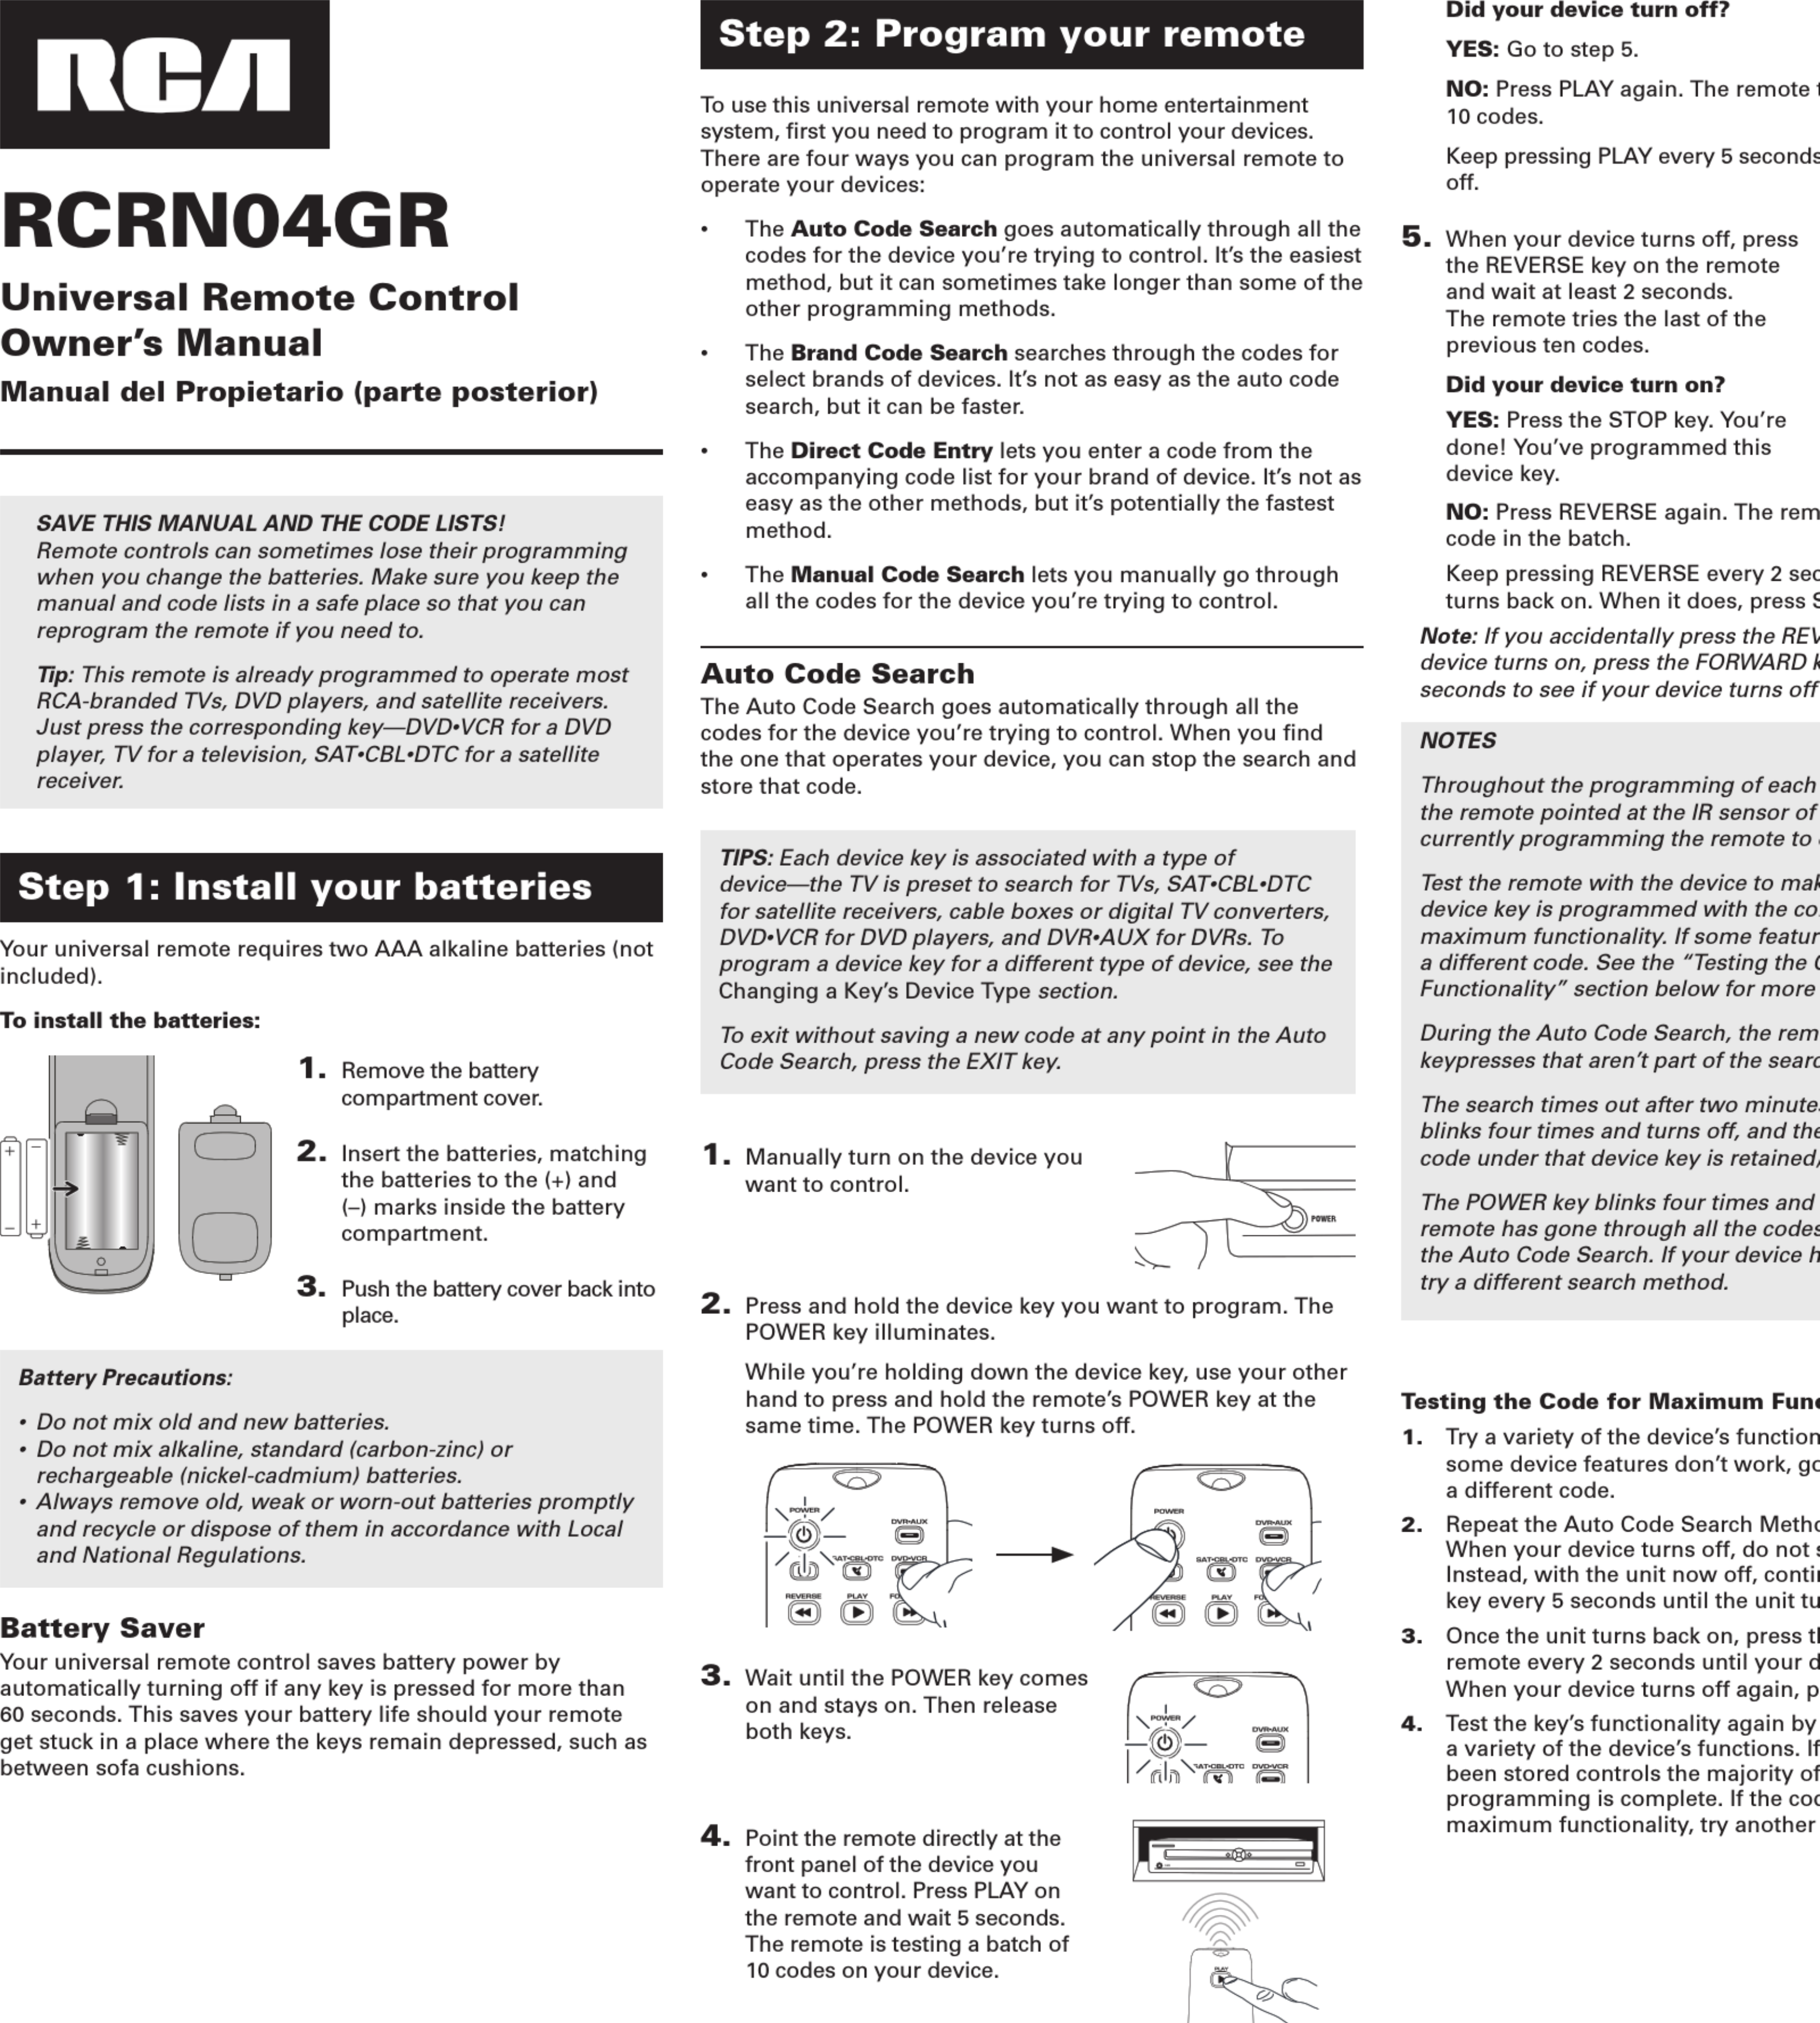 Page 1 of 2 - Rca Rca-Rcrn04Gr-Owners-Manual-1003356 User Manual